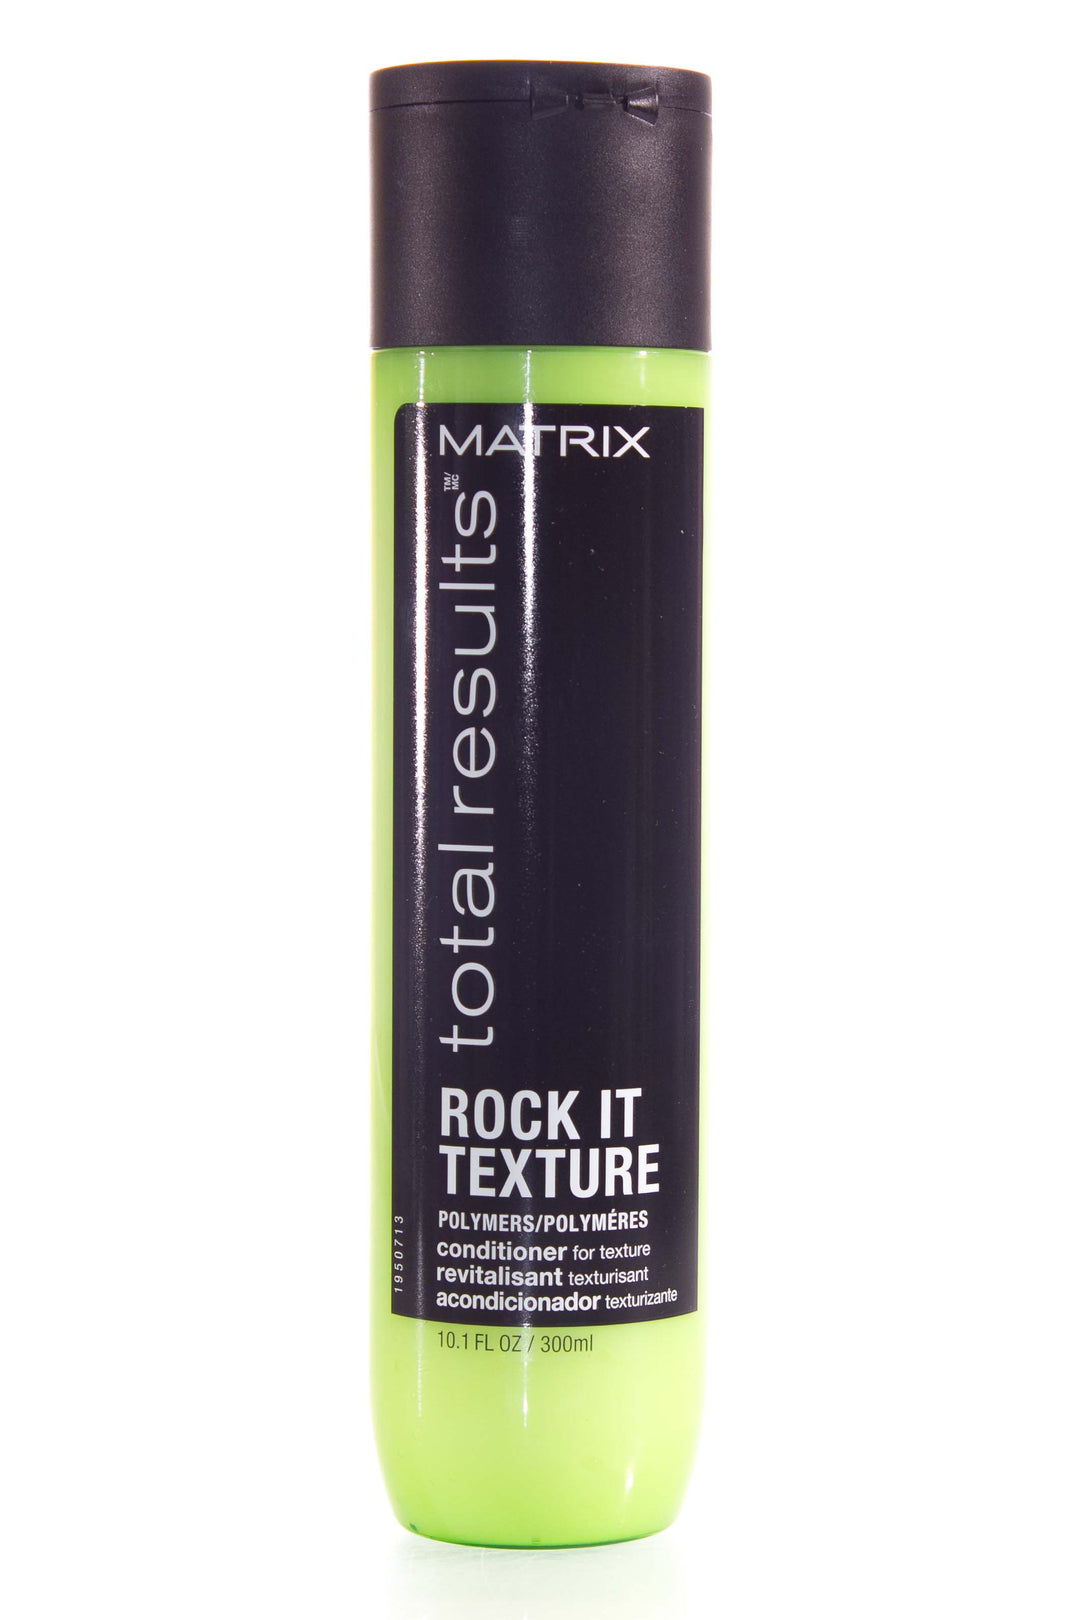 Product Image: Matrix Total Results Rock It Texture Conditioner - 300ml